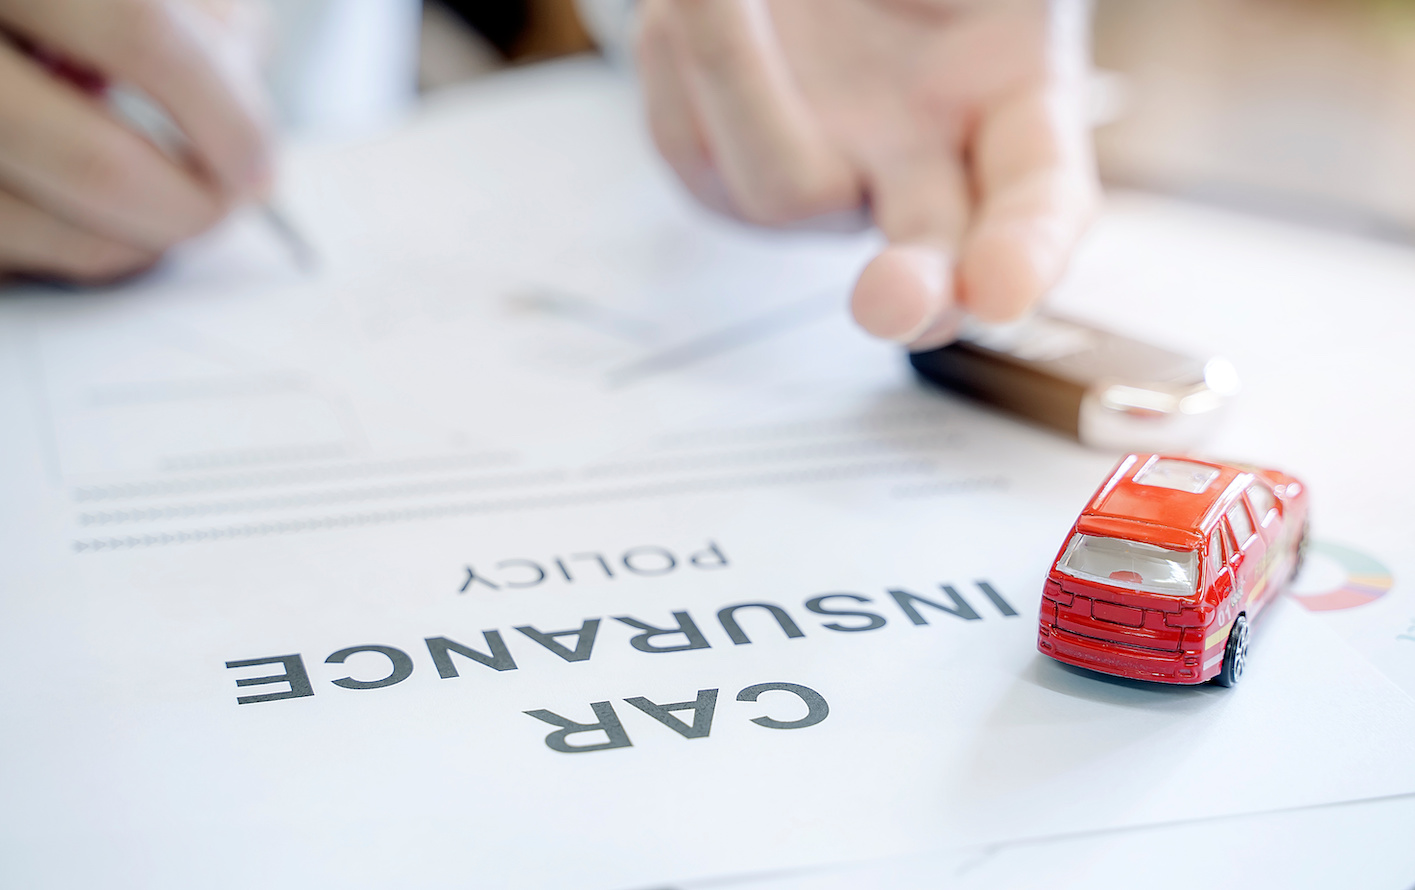 Car insurance policy with red car toy and blurred image of man hand for vehicle insurance policy concept.